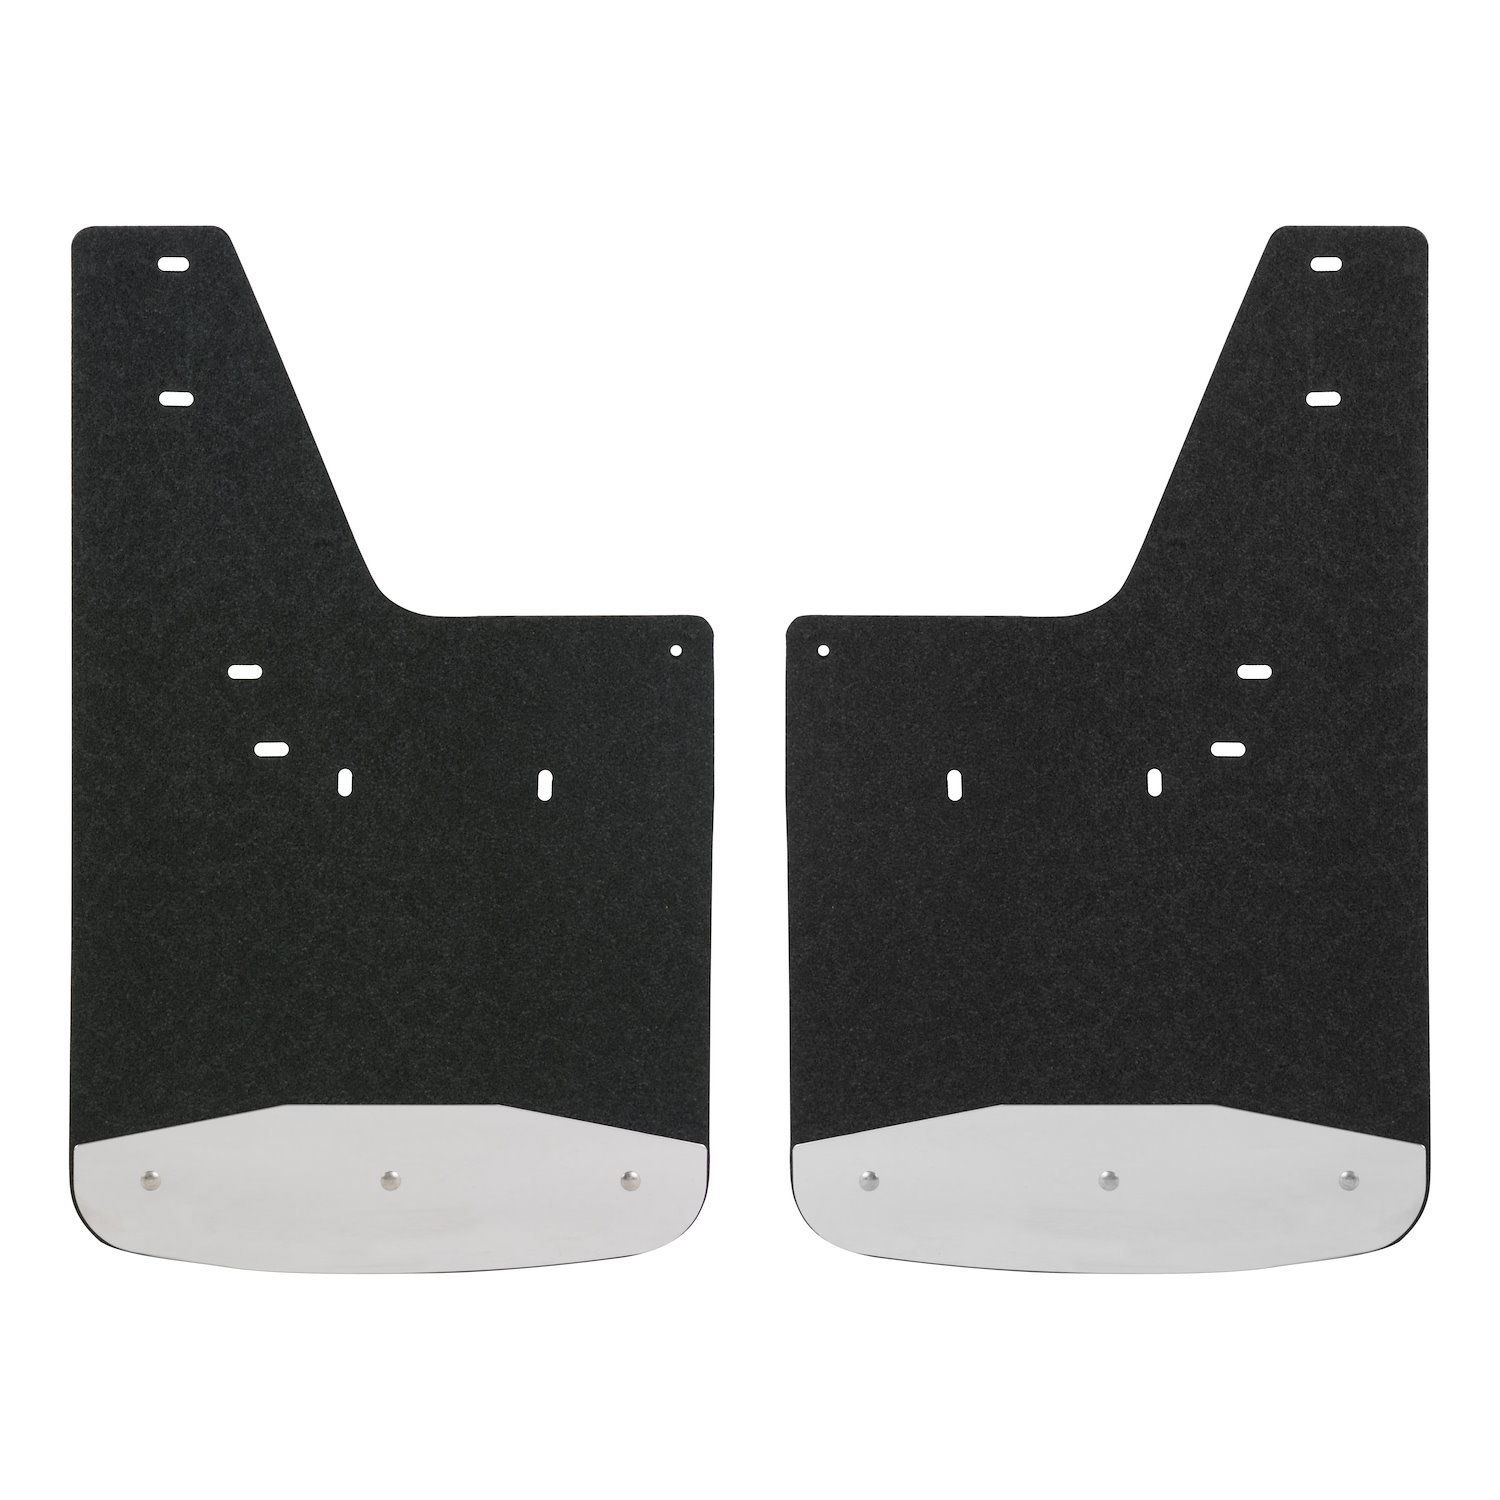 250931 Rear 12 in. x 20 in. Rubber Mud Guards Fits Select Dodge, Ram 1500, 2500